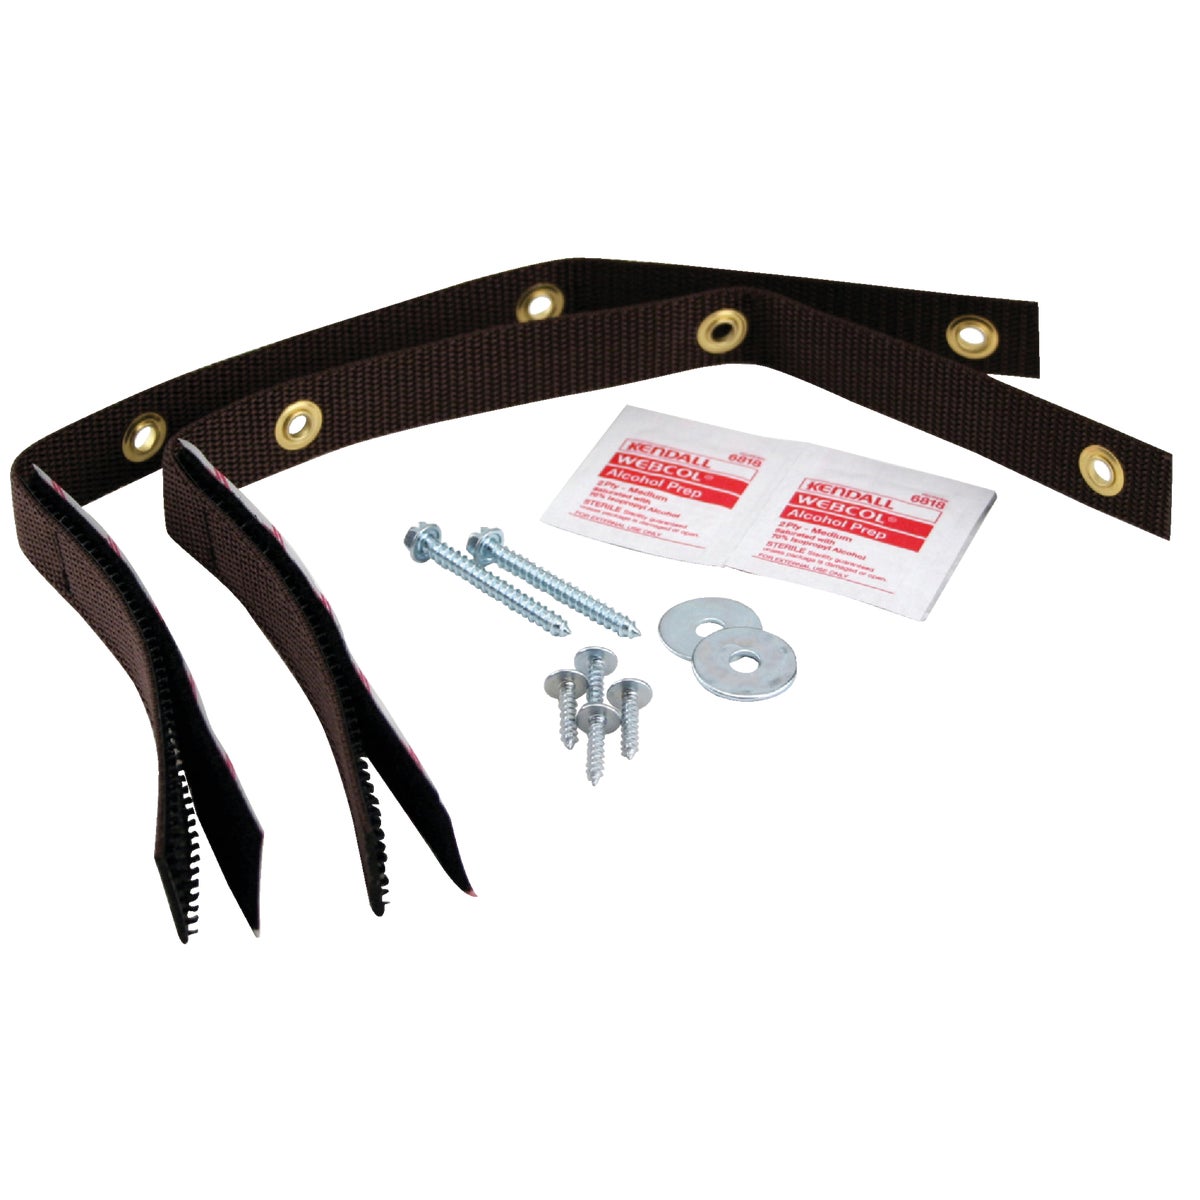 Item 240509, Prevent damage and injury using this strong and versatile strap, while also